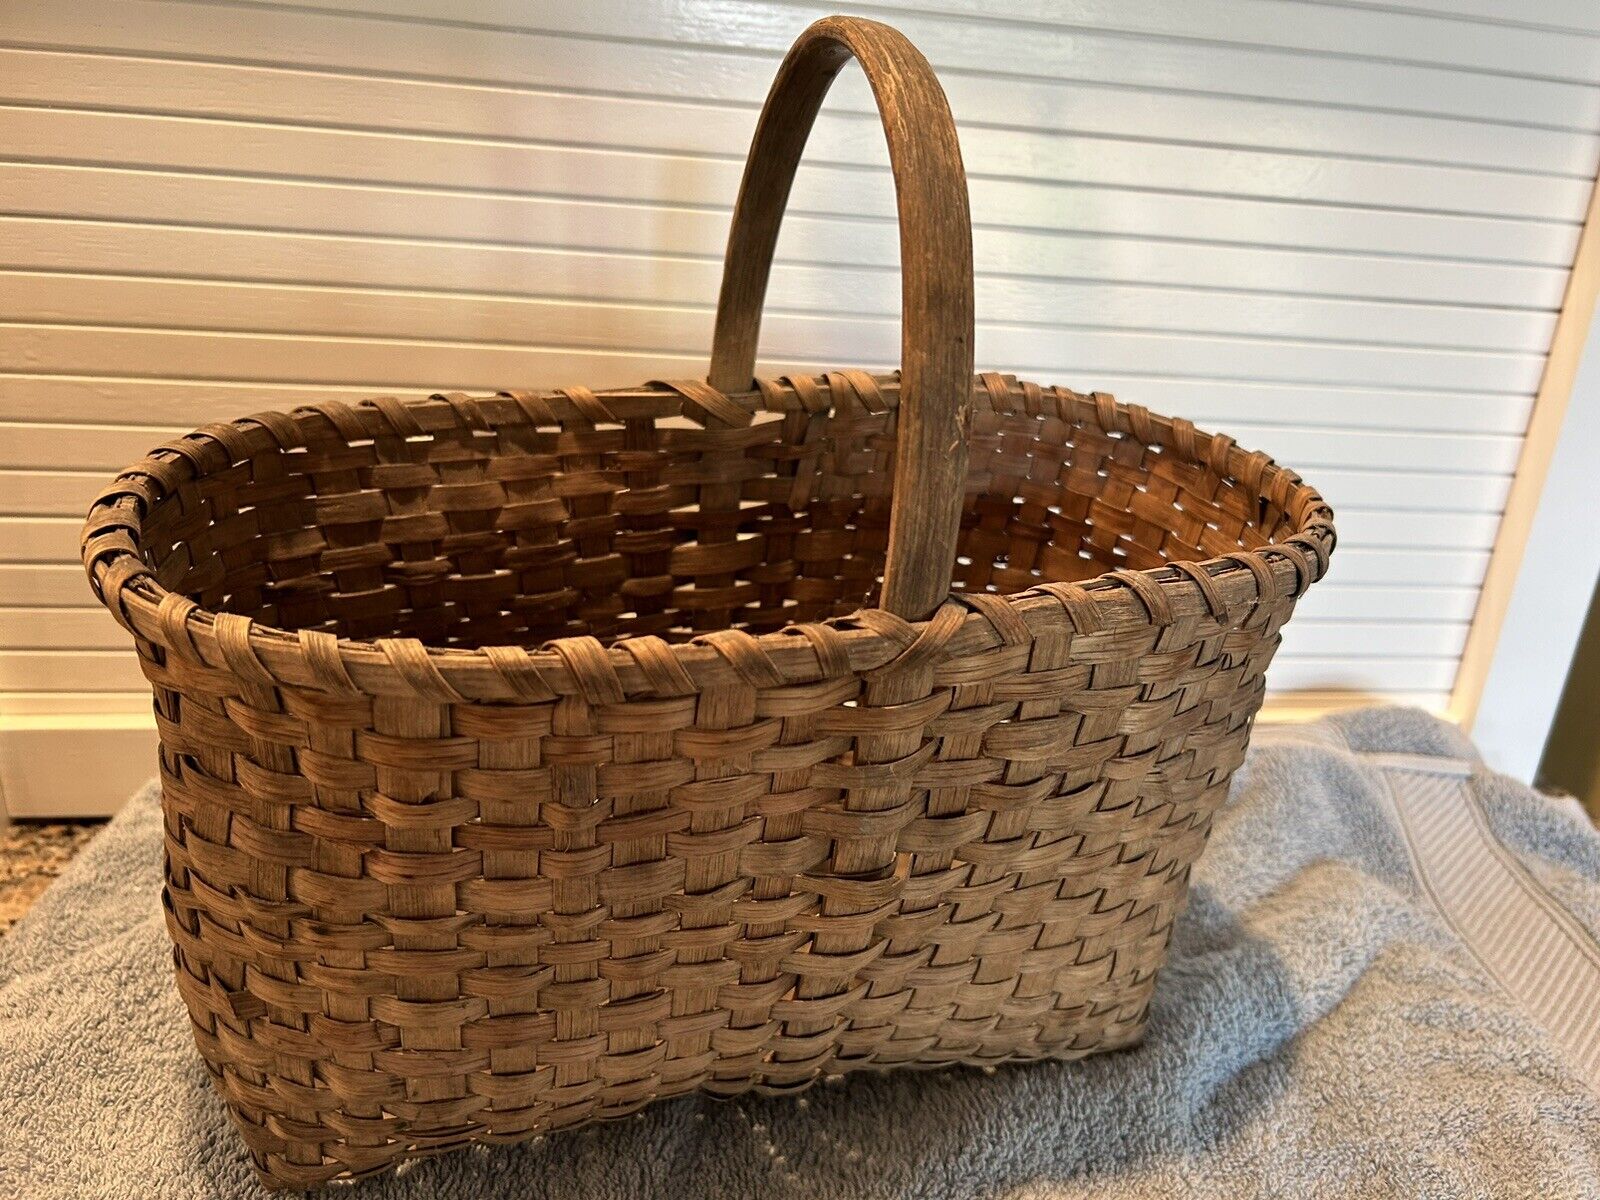 WONDERFUL OLD ANTIQUE HAND-WOVEN BASKET WITH HANDLE PROBABLY FROM THE 1800's